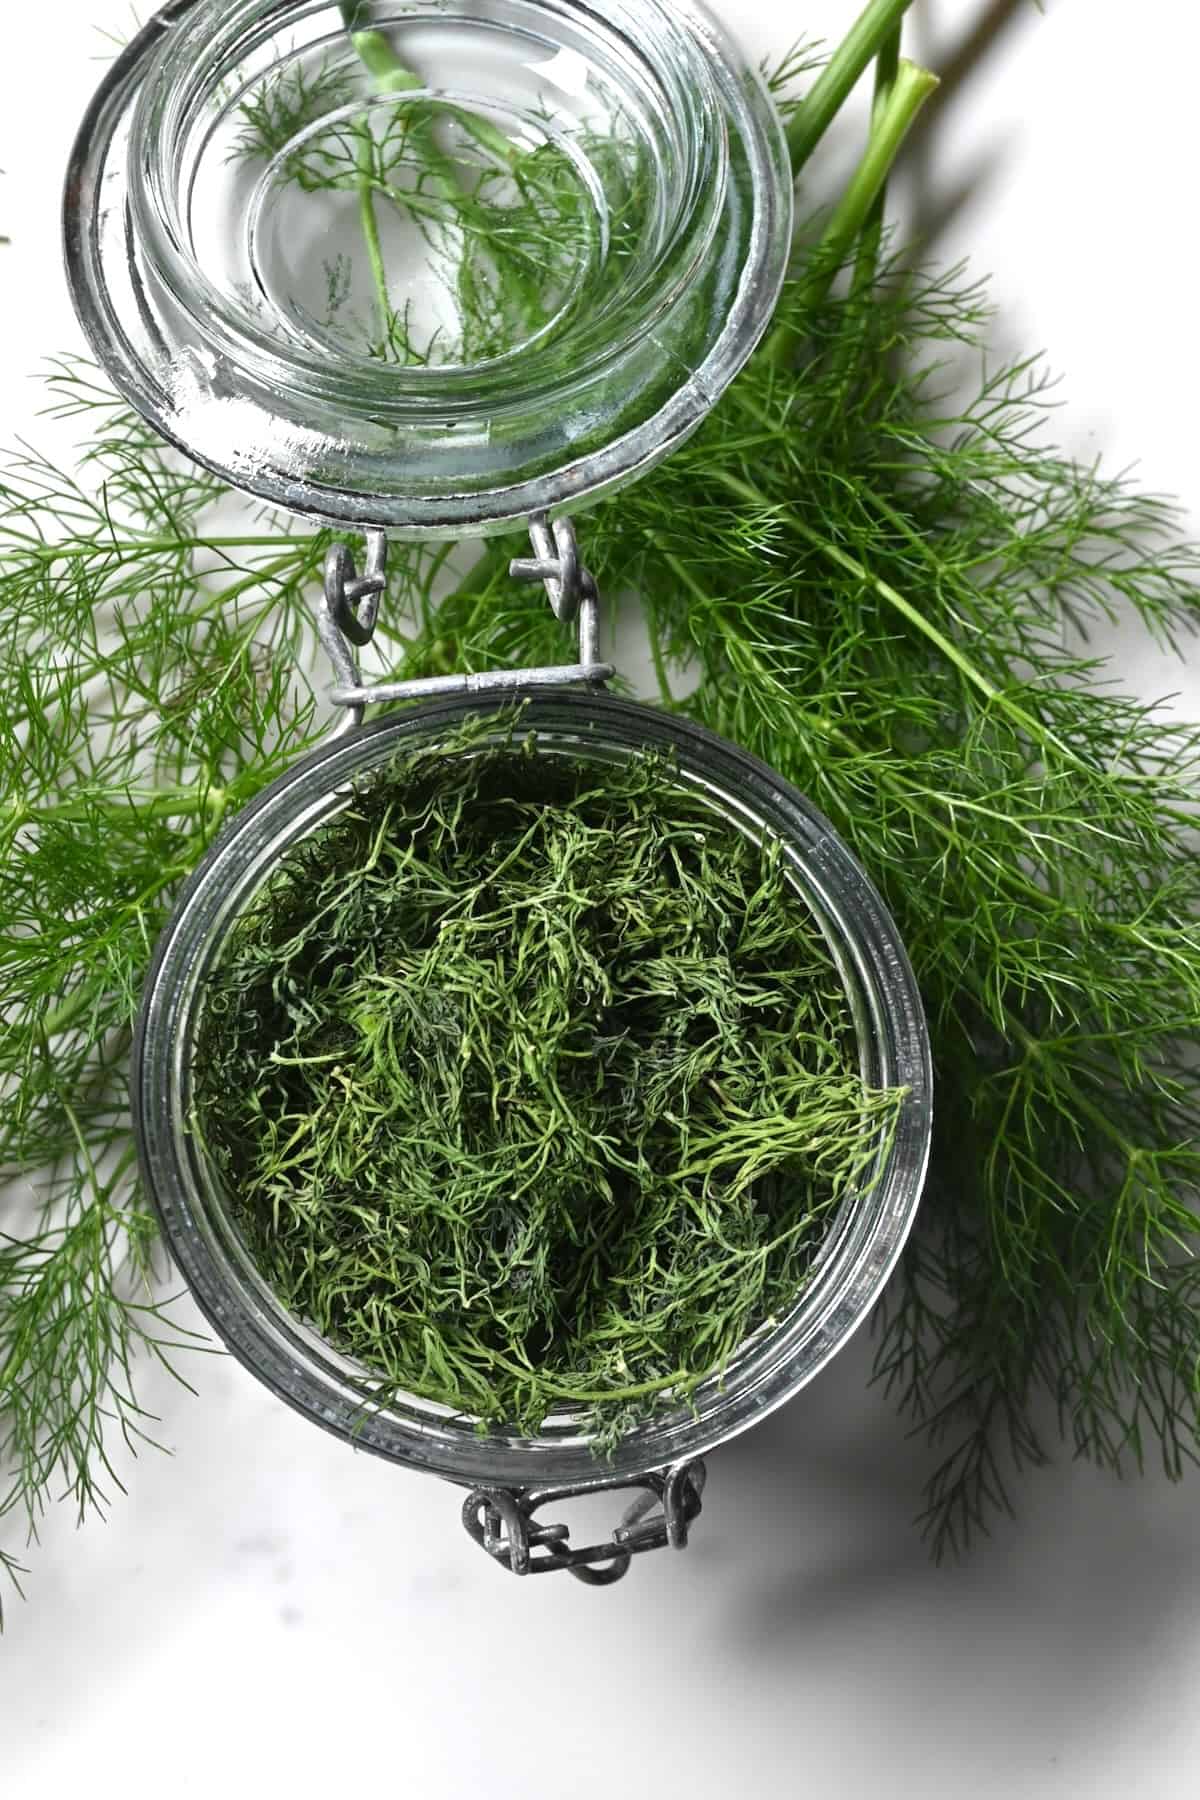 A jar with homemade dried dill